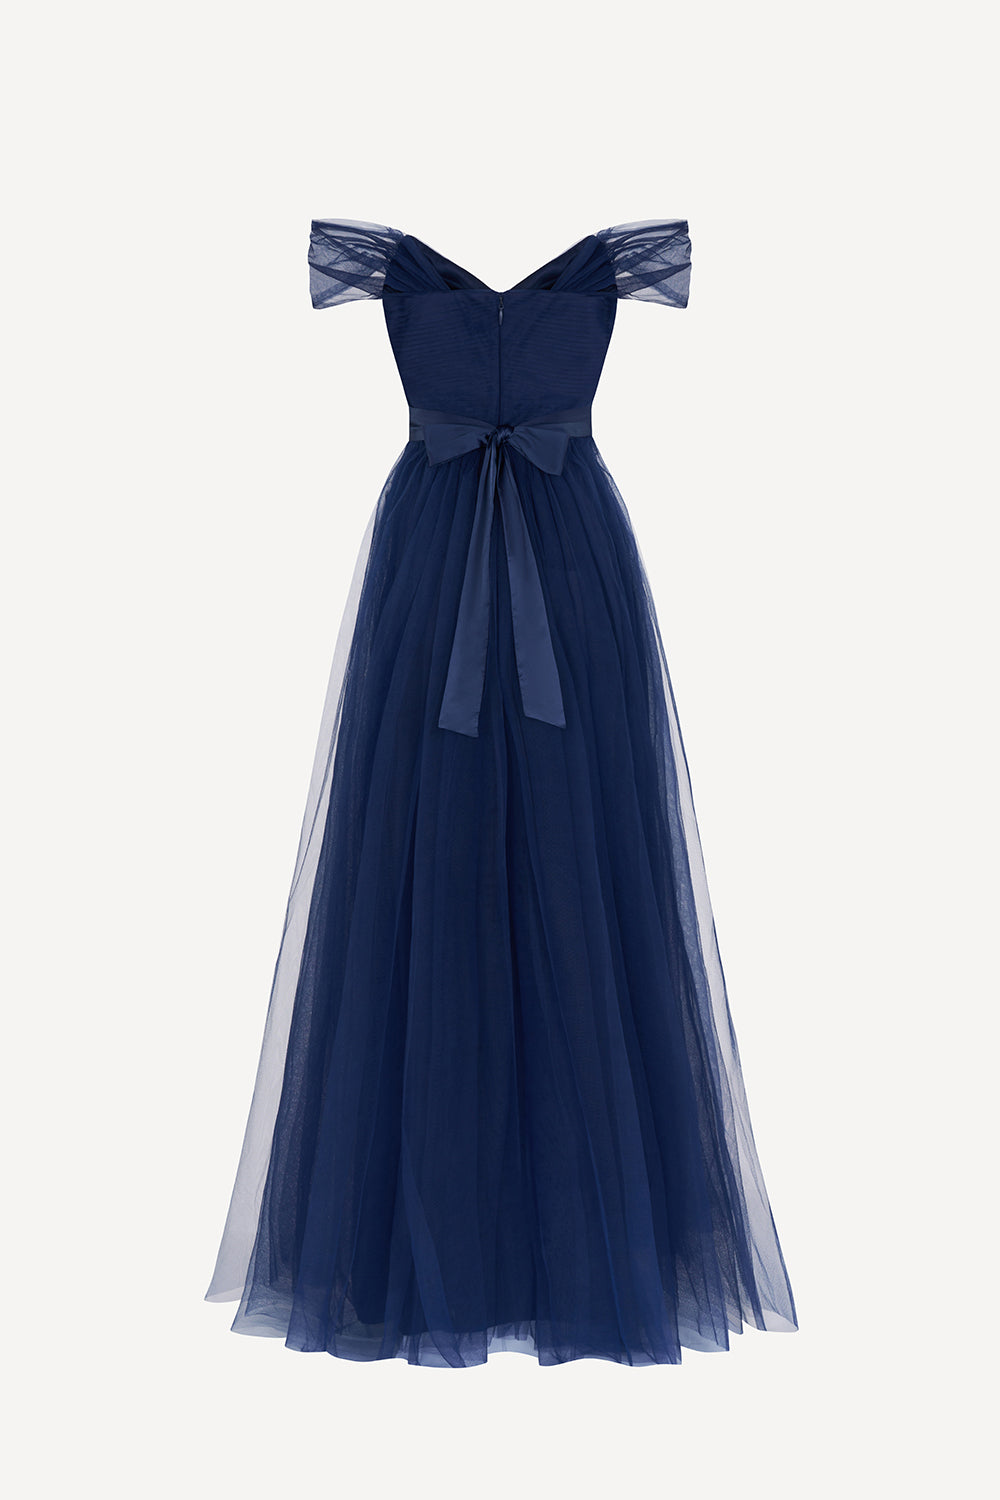 Fairytale gown in navy